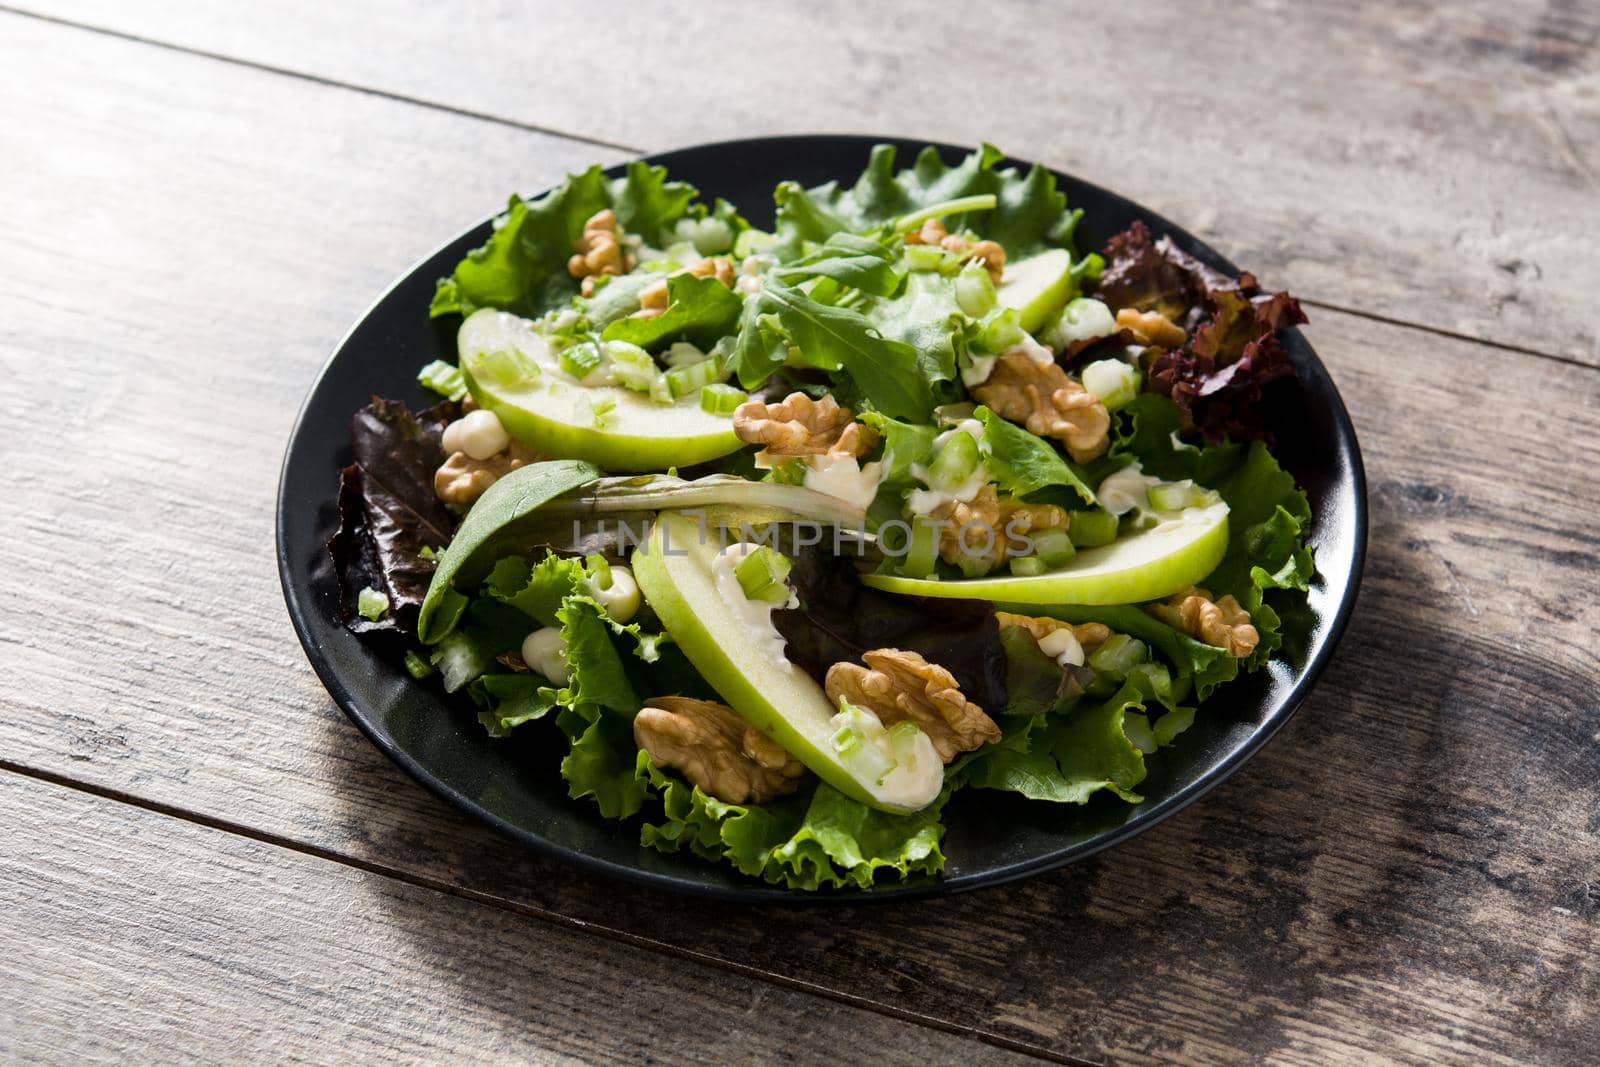 Fresh Waldorf salad with lettuce, green apples, walnuts and cele by chandlervid85